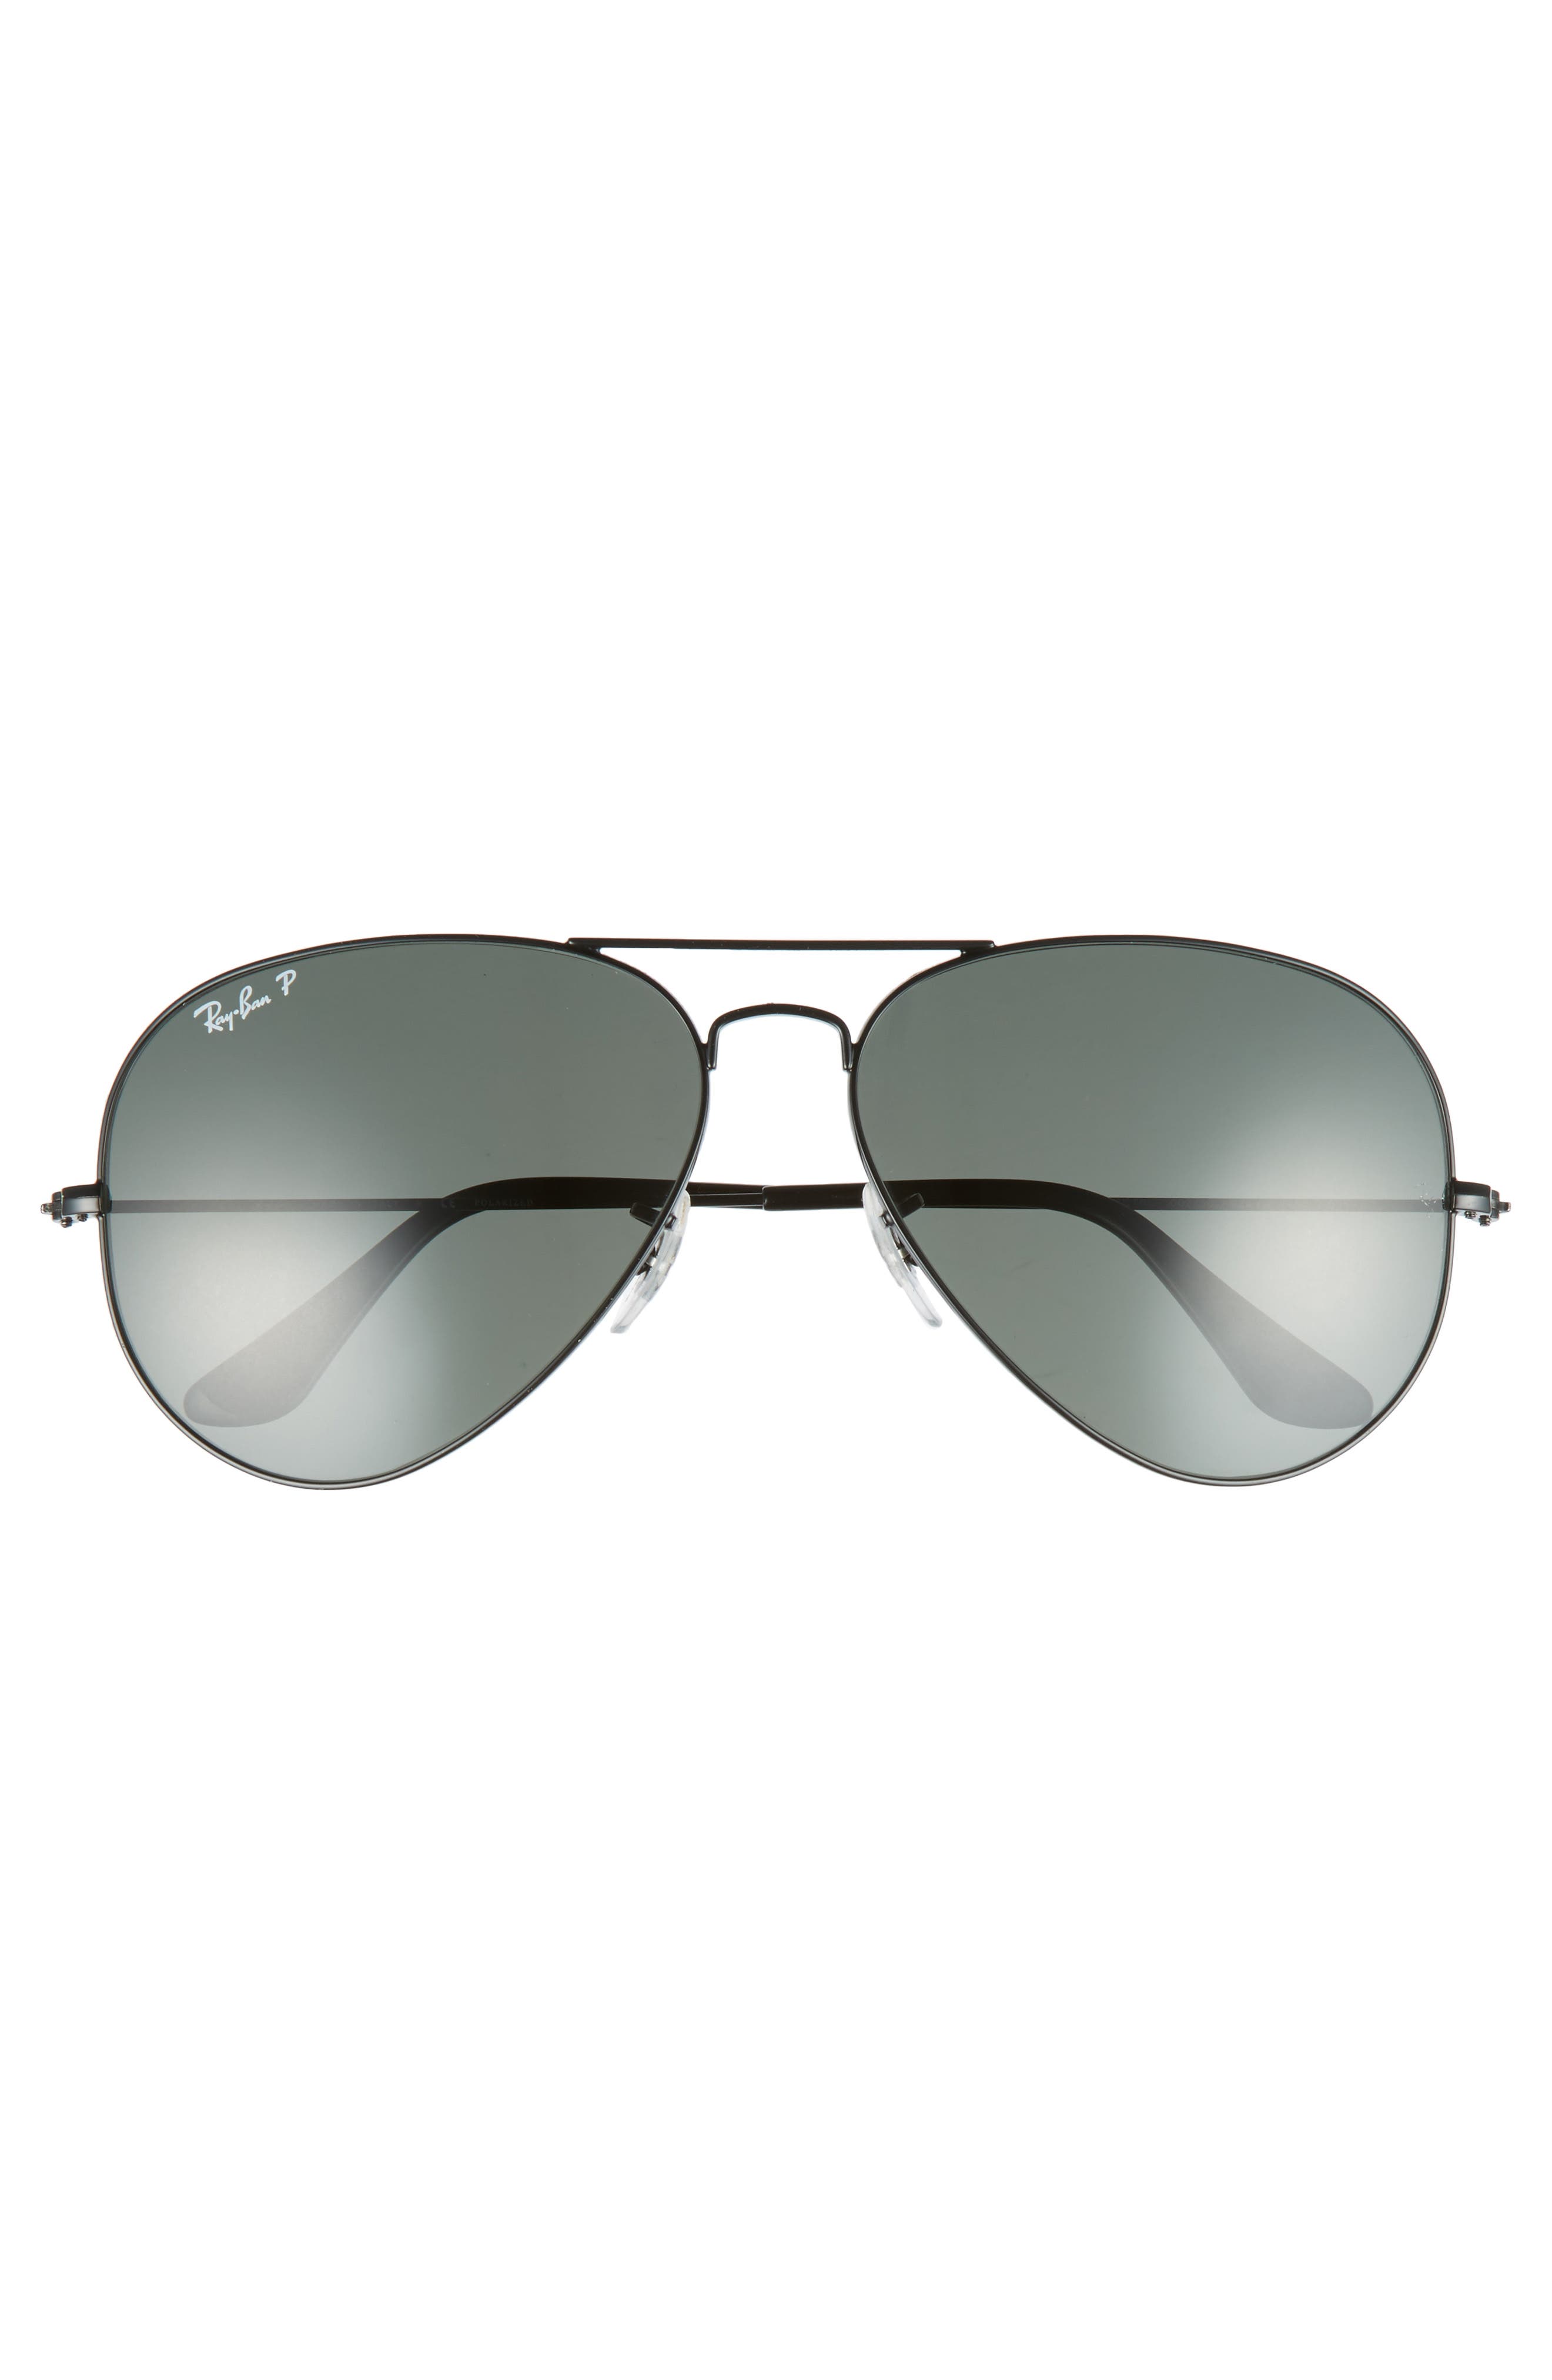 Accessories Sunglasses Aviator Glasses Ray Ban Aviator Glasses silver-colored themed print casual look 